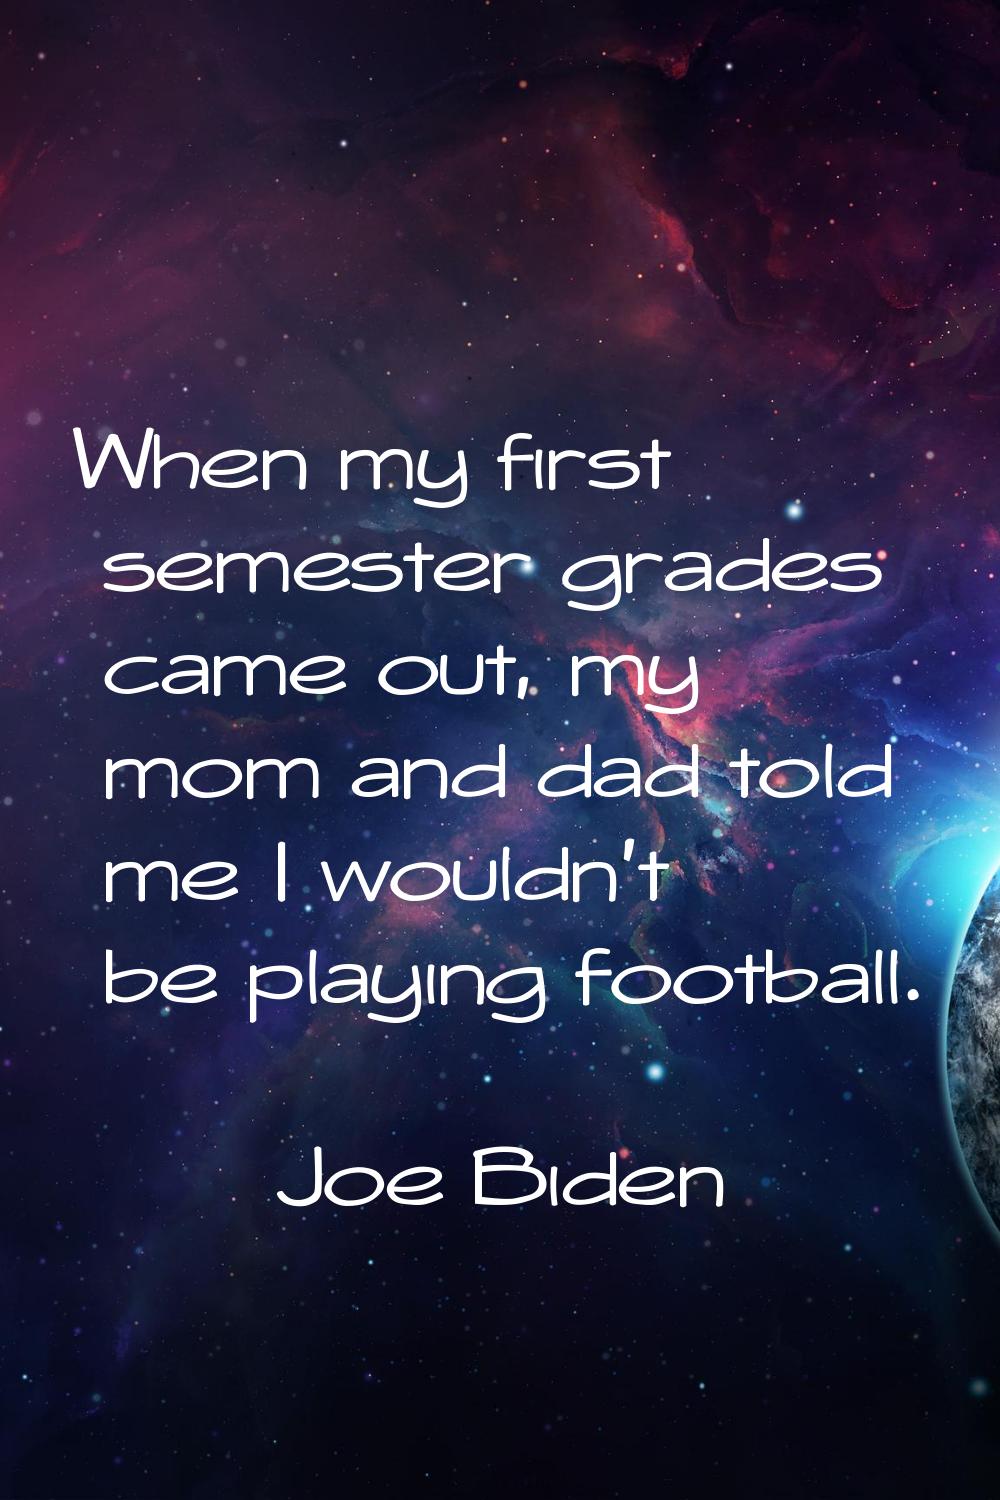 When my first semester grades came out, my mom and dad told me I wouldn't be playing football.